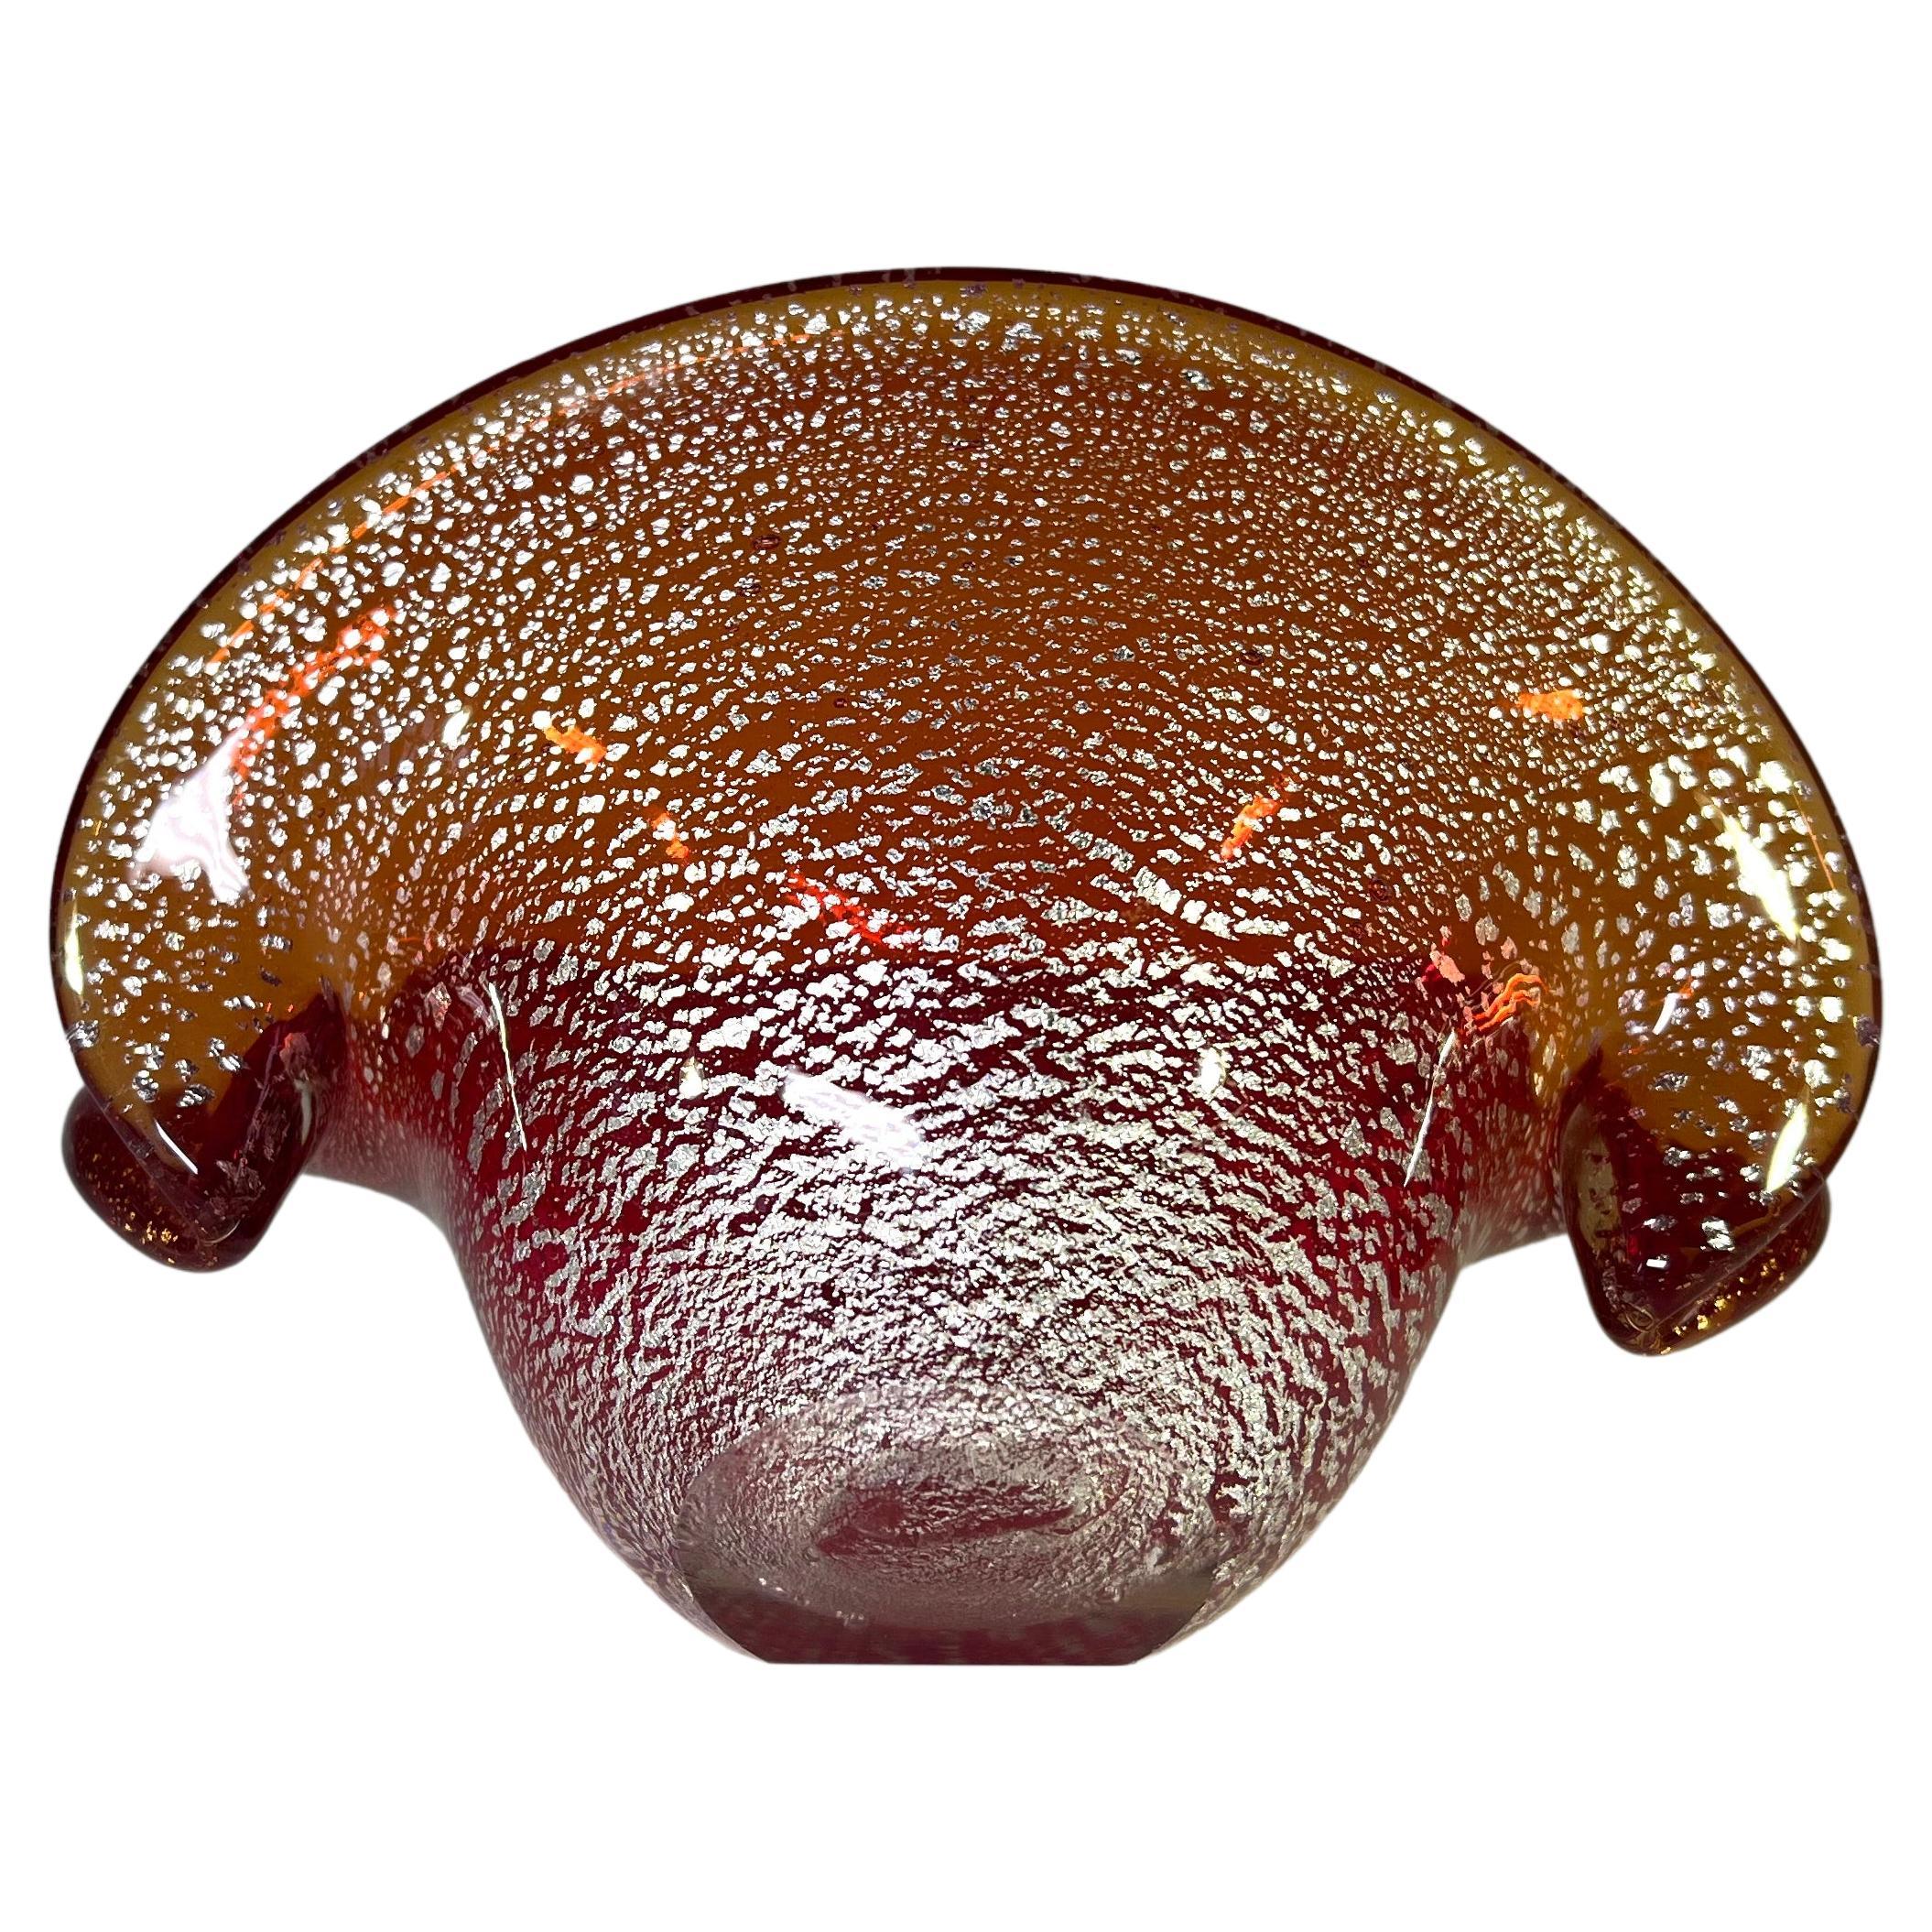 Luxuriant Liquid Amber And Silver Shards, Murano Glass Clam Shell Vase For Sale